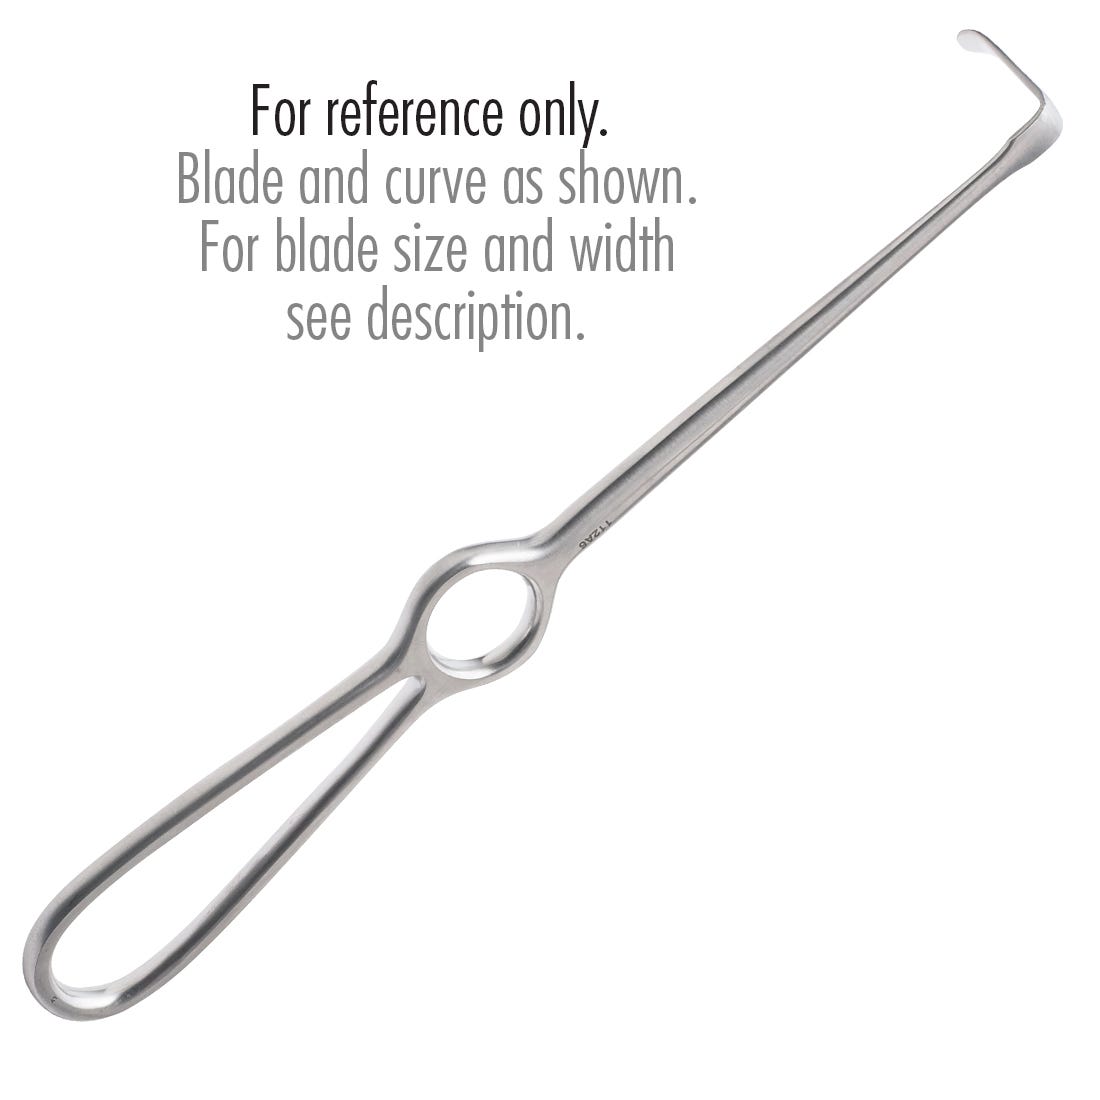 Obwegeser Type Surgical Retractor Standard, Curved Down, 13mm x 45mm